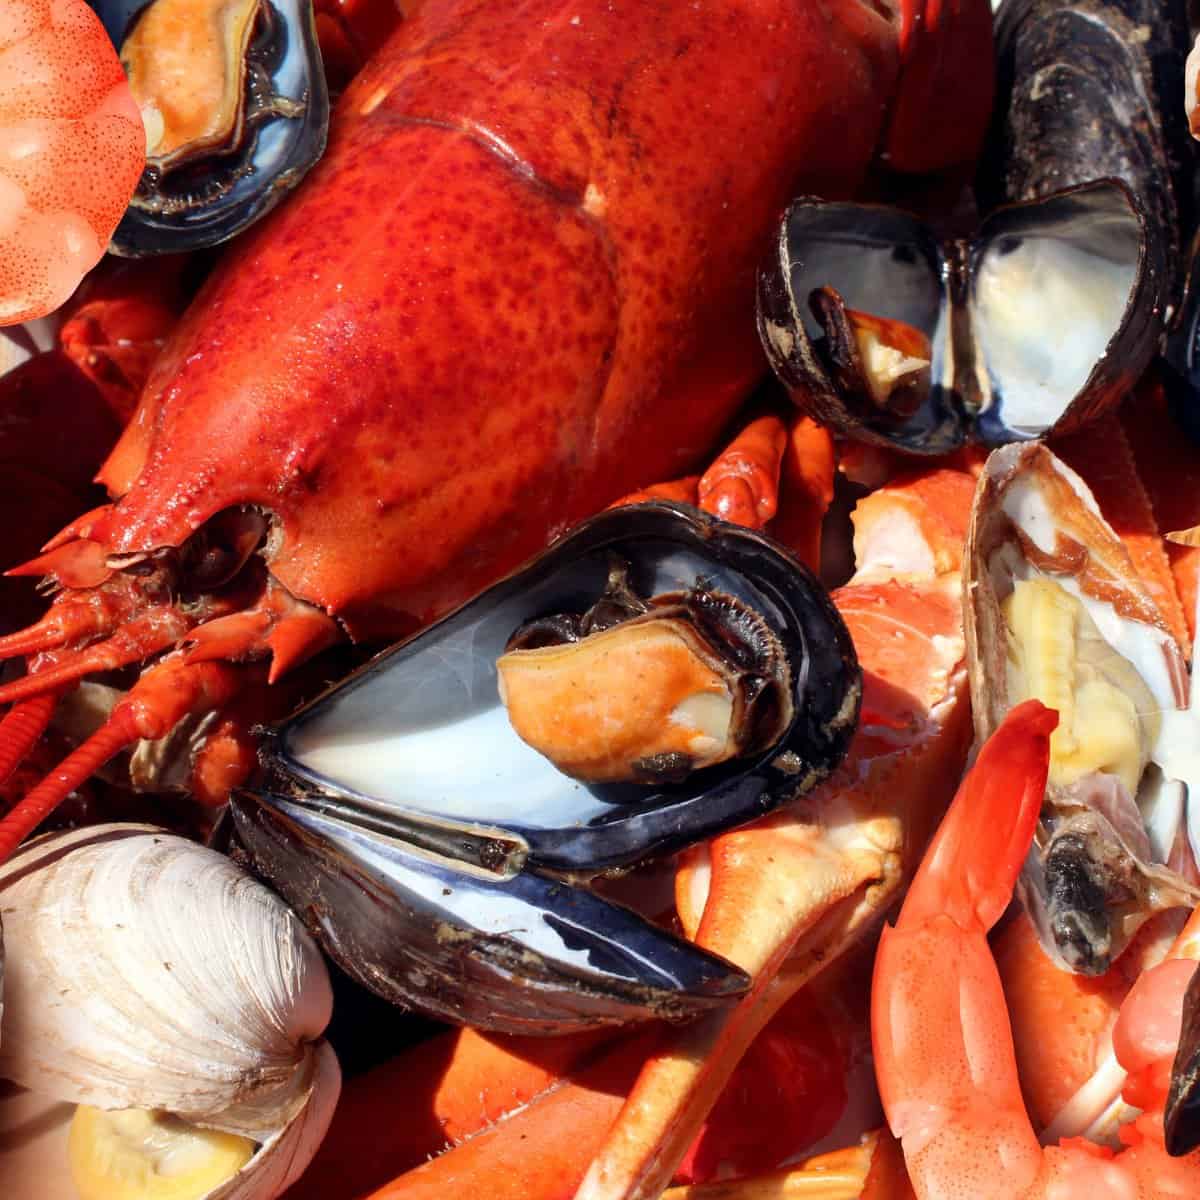 How to cook with shellfish